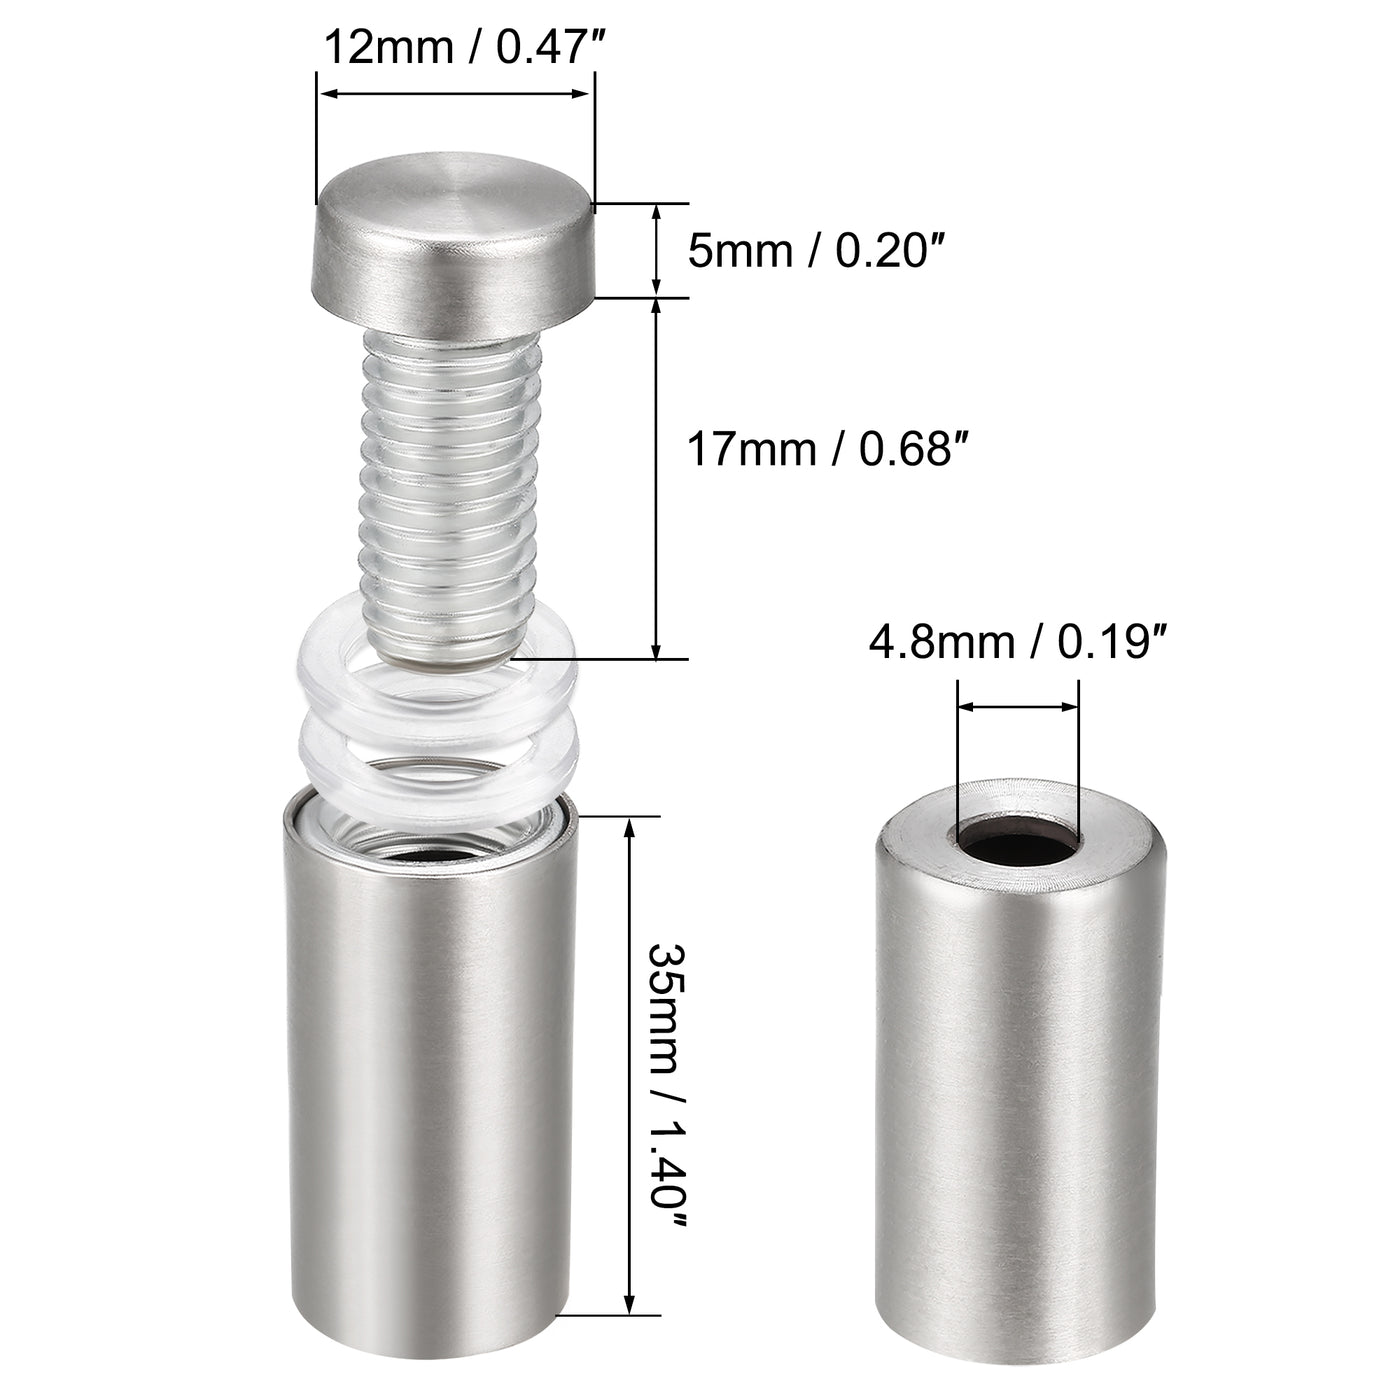 uxcell Uxcell Glass Standoff Mount Stainless Steel Wall Standoff Holder Advertising Nails 12mm Dia 43mm Length 8 Pcs